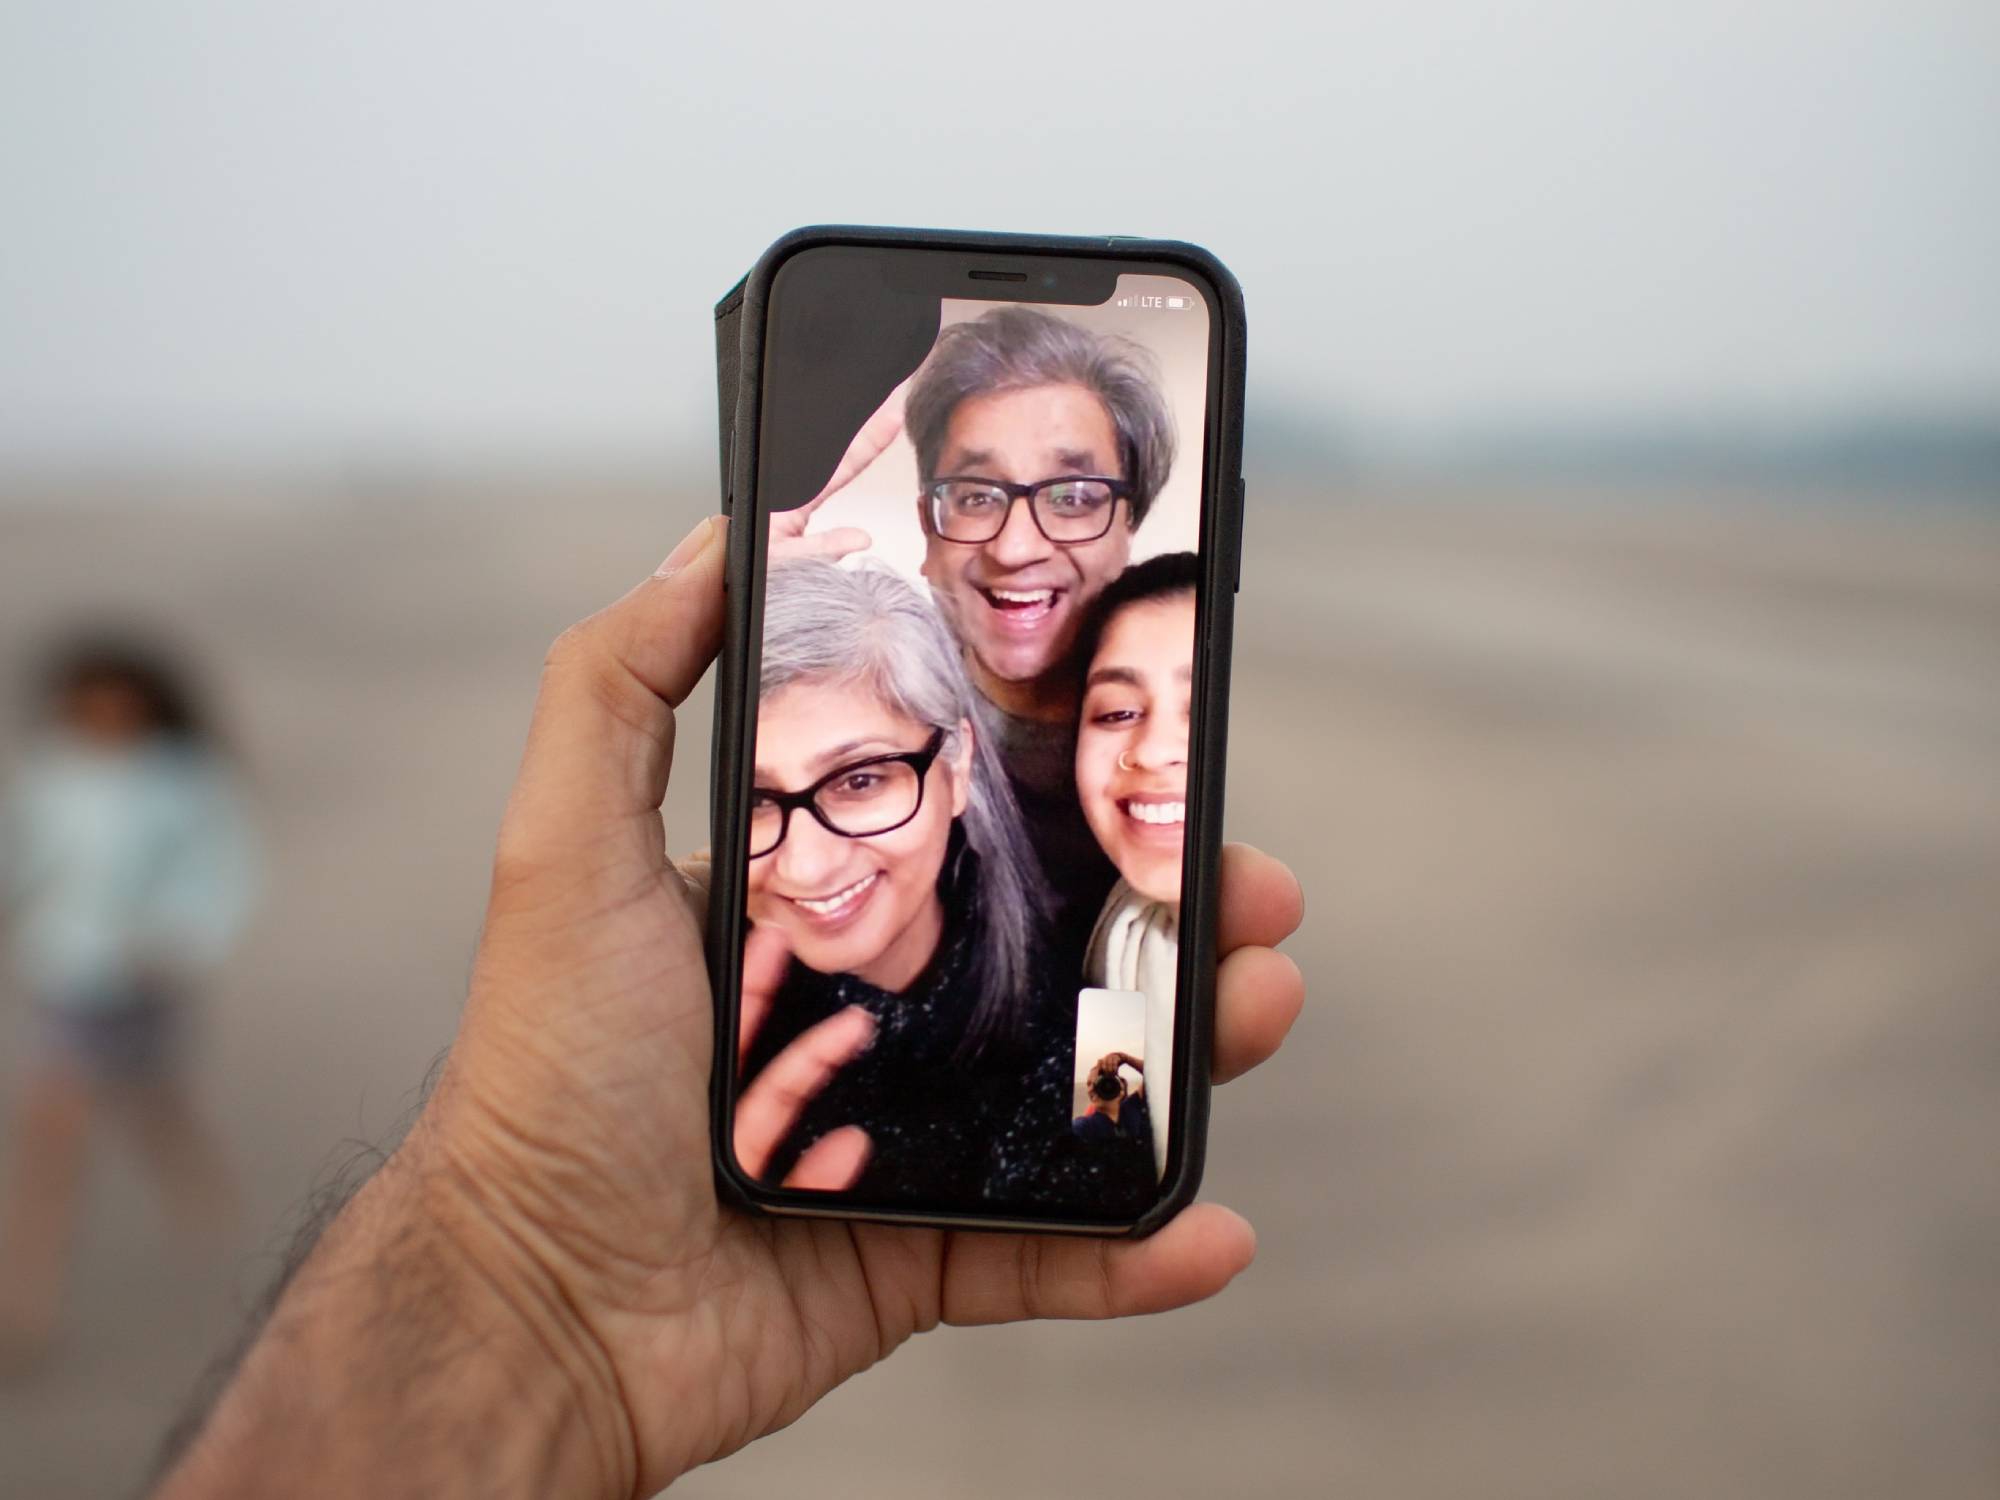 18 tips to get the most out of your favorite video call apps